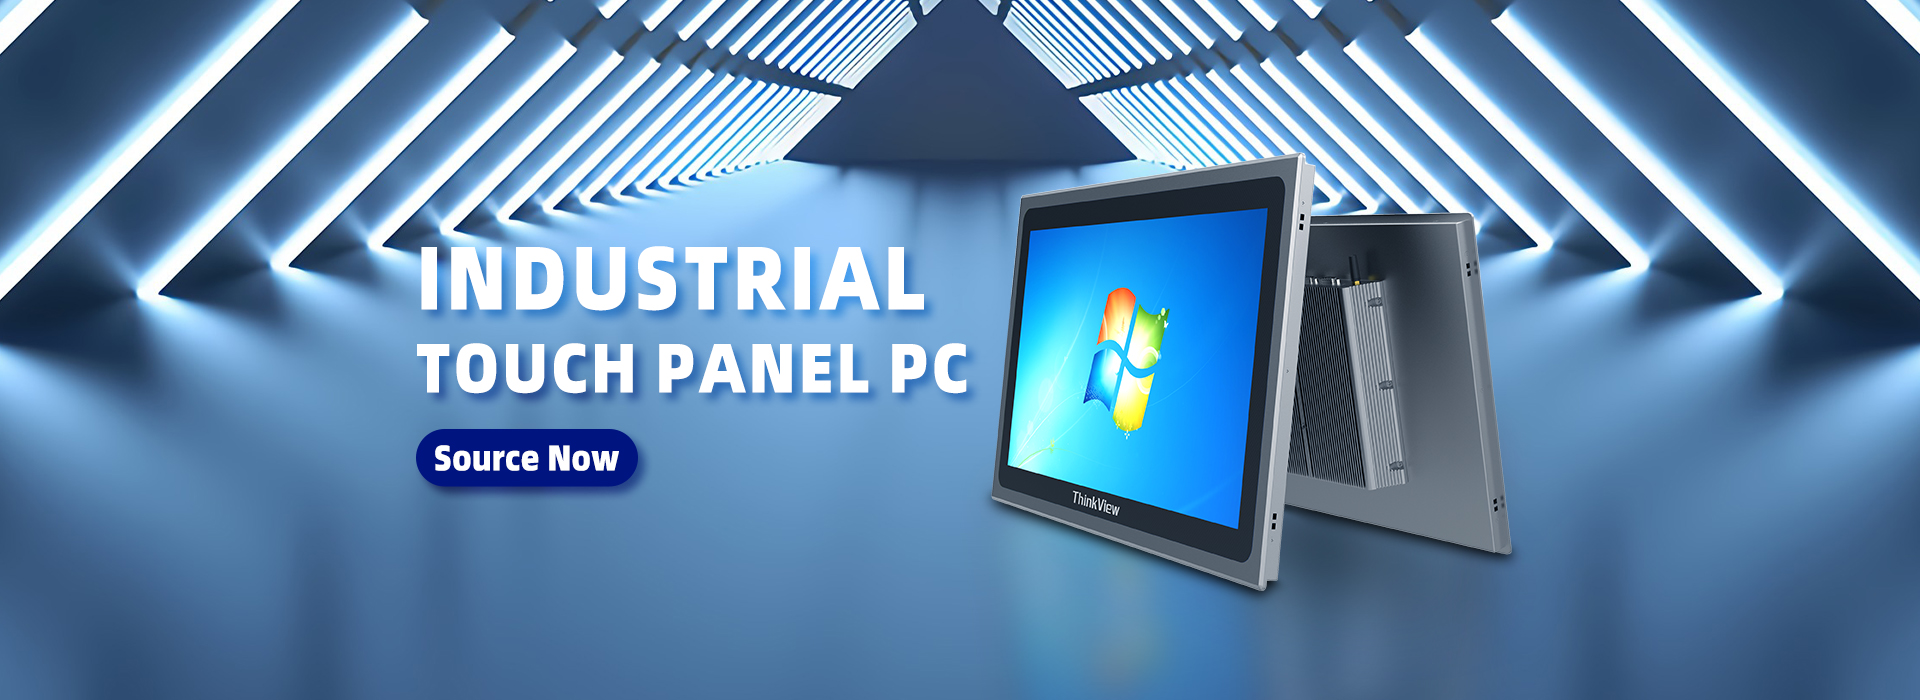 Industrial Touch Panel PC